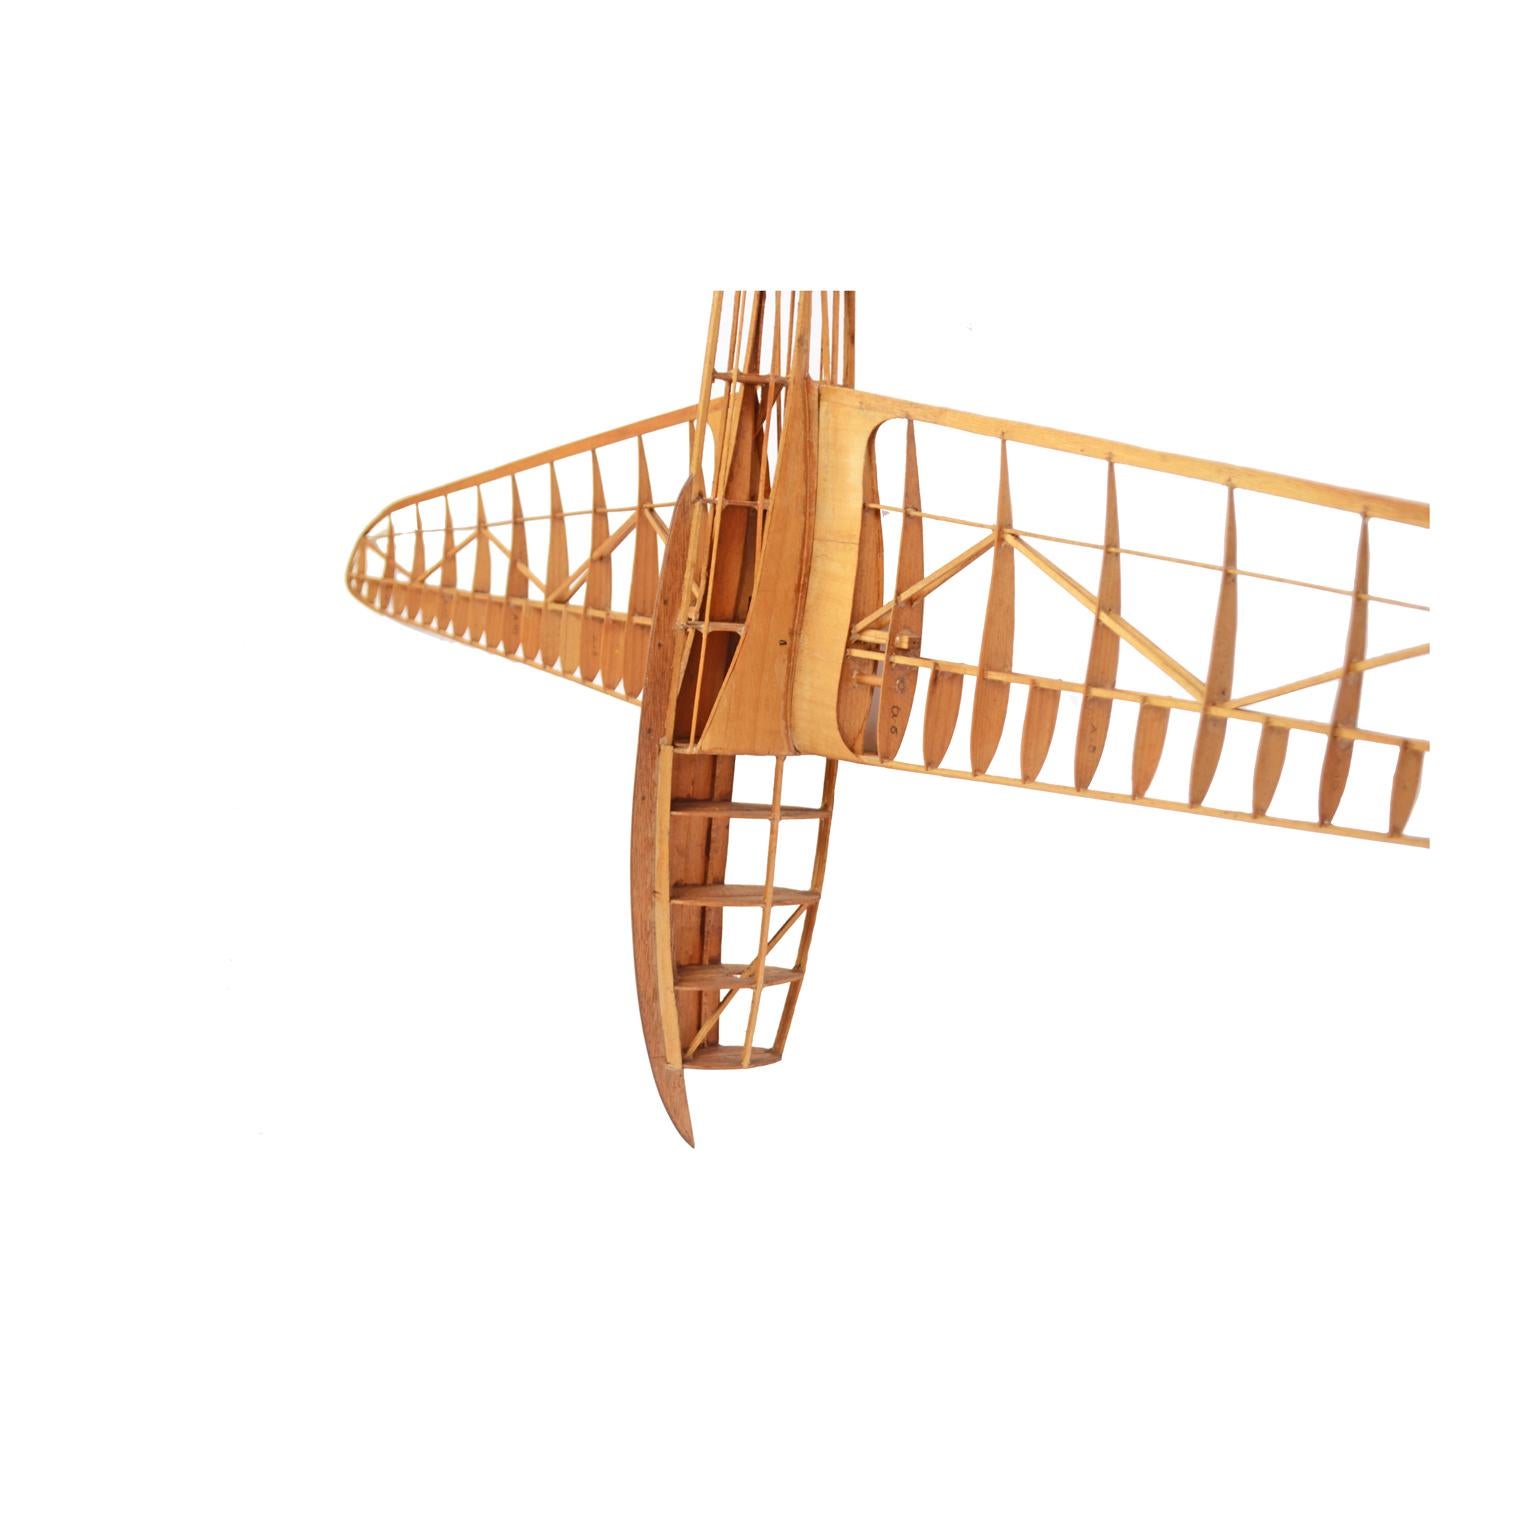 Scale Model of the Structure of a Passenger Airplane 1